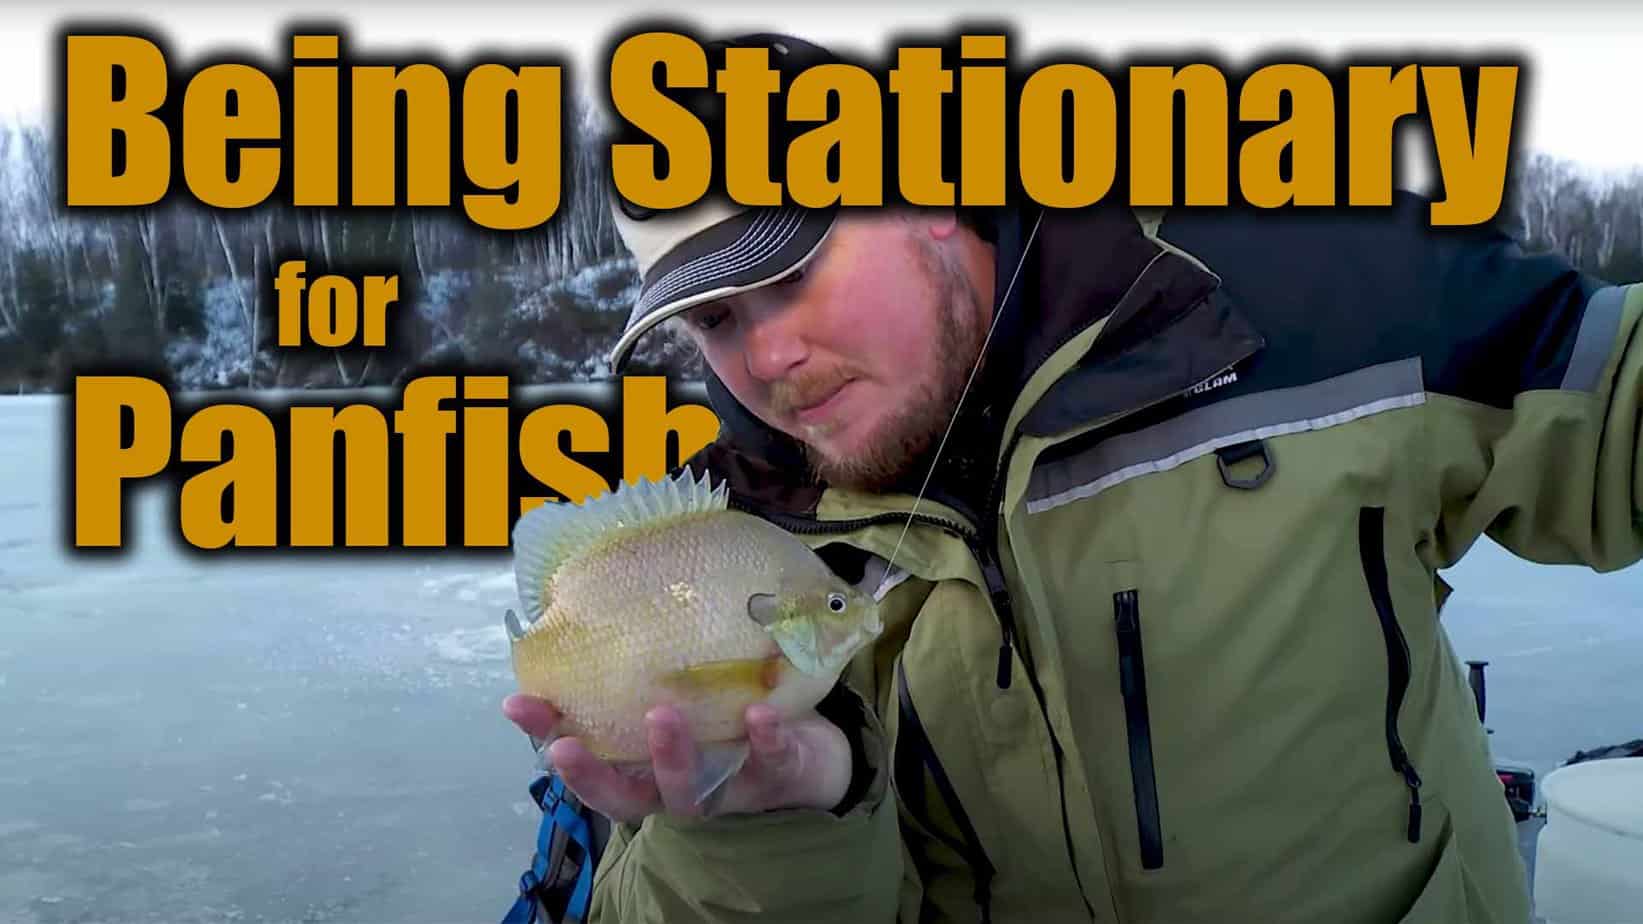 ICE PANFISH Archives